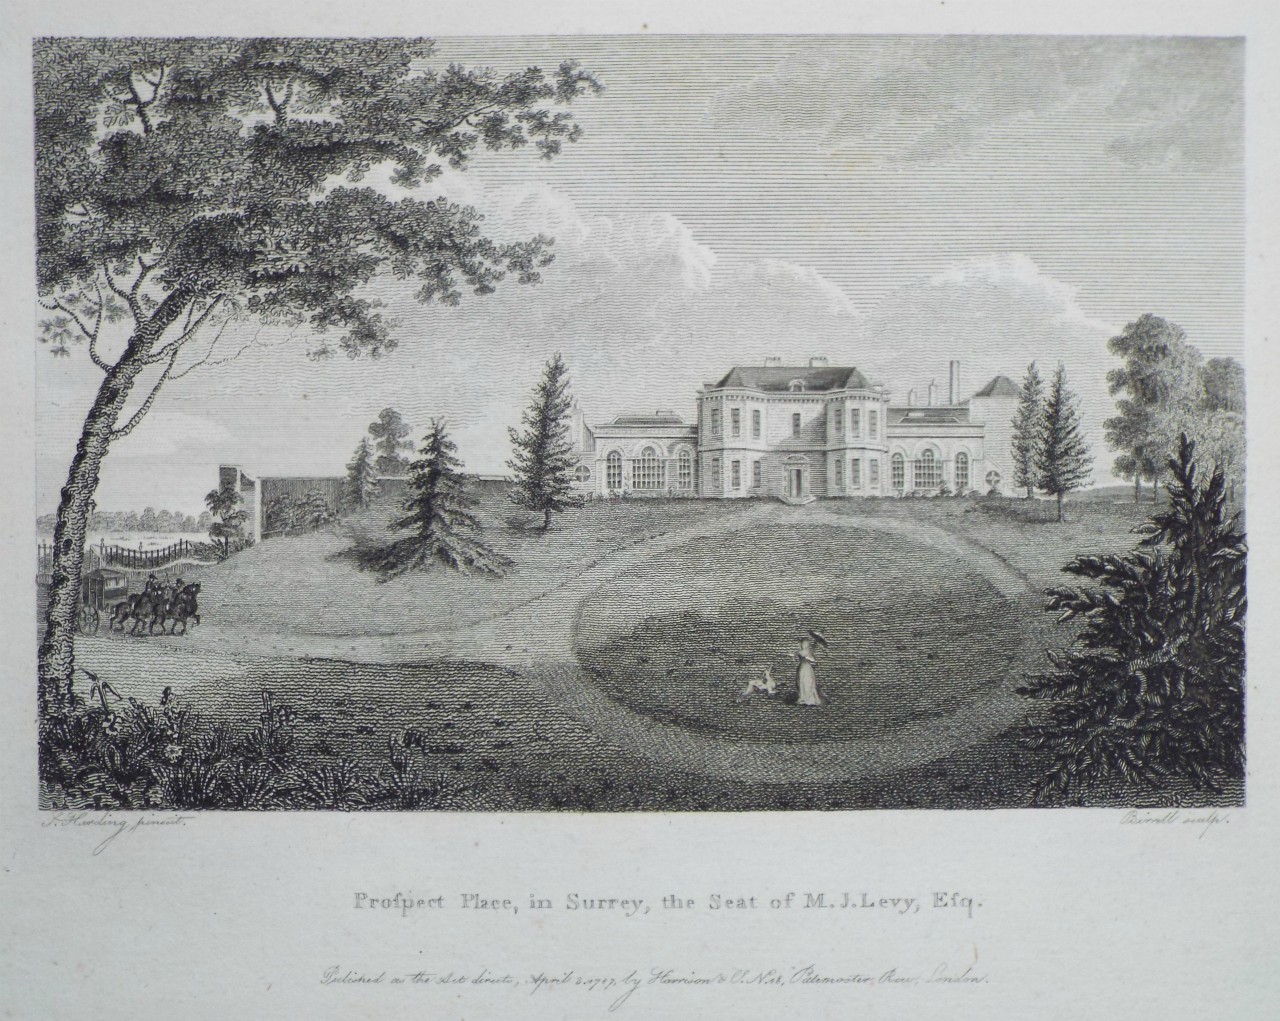 Print - Prospect Place, in Surrey, the Seat of M.J.Levy, Esq. - 